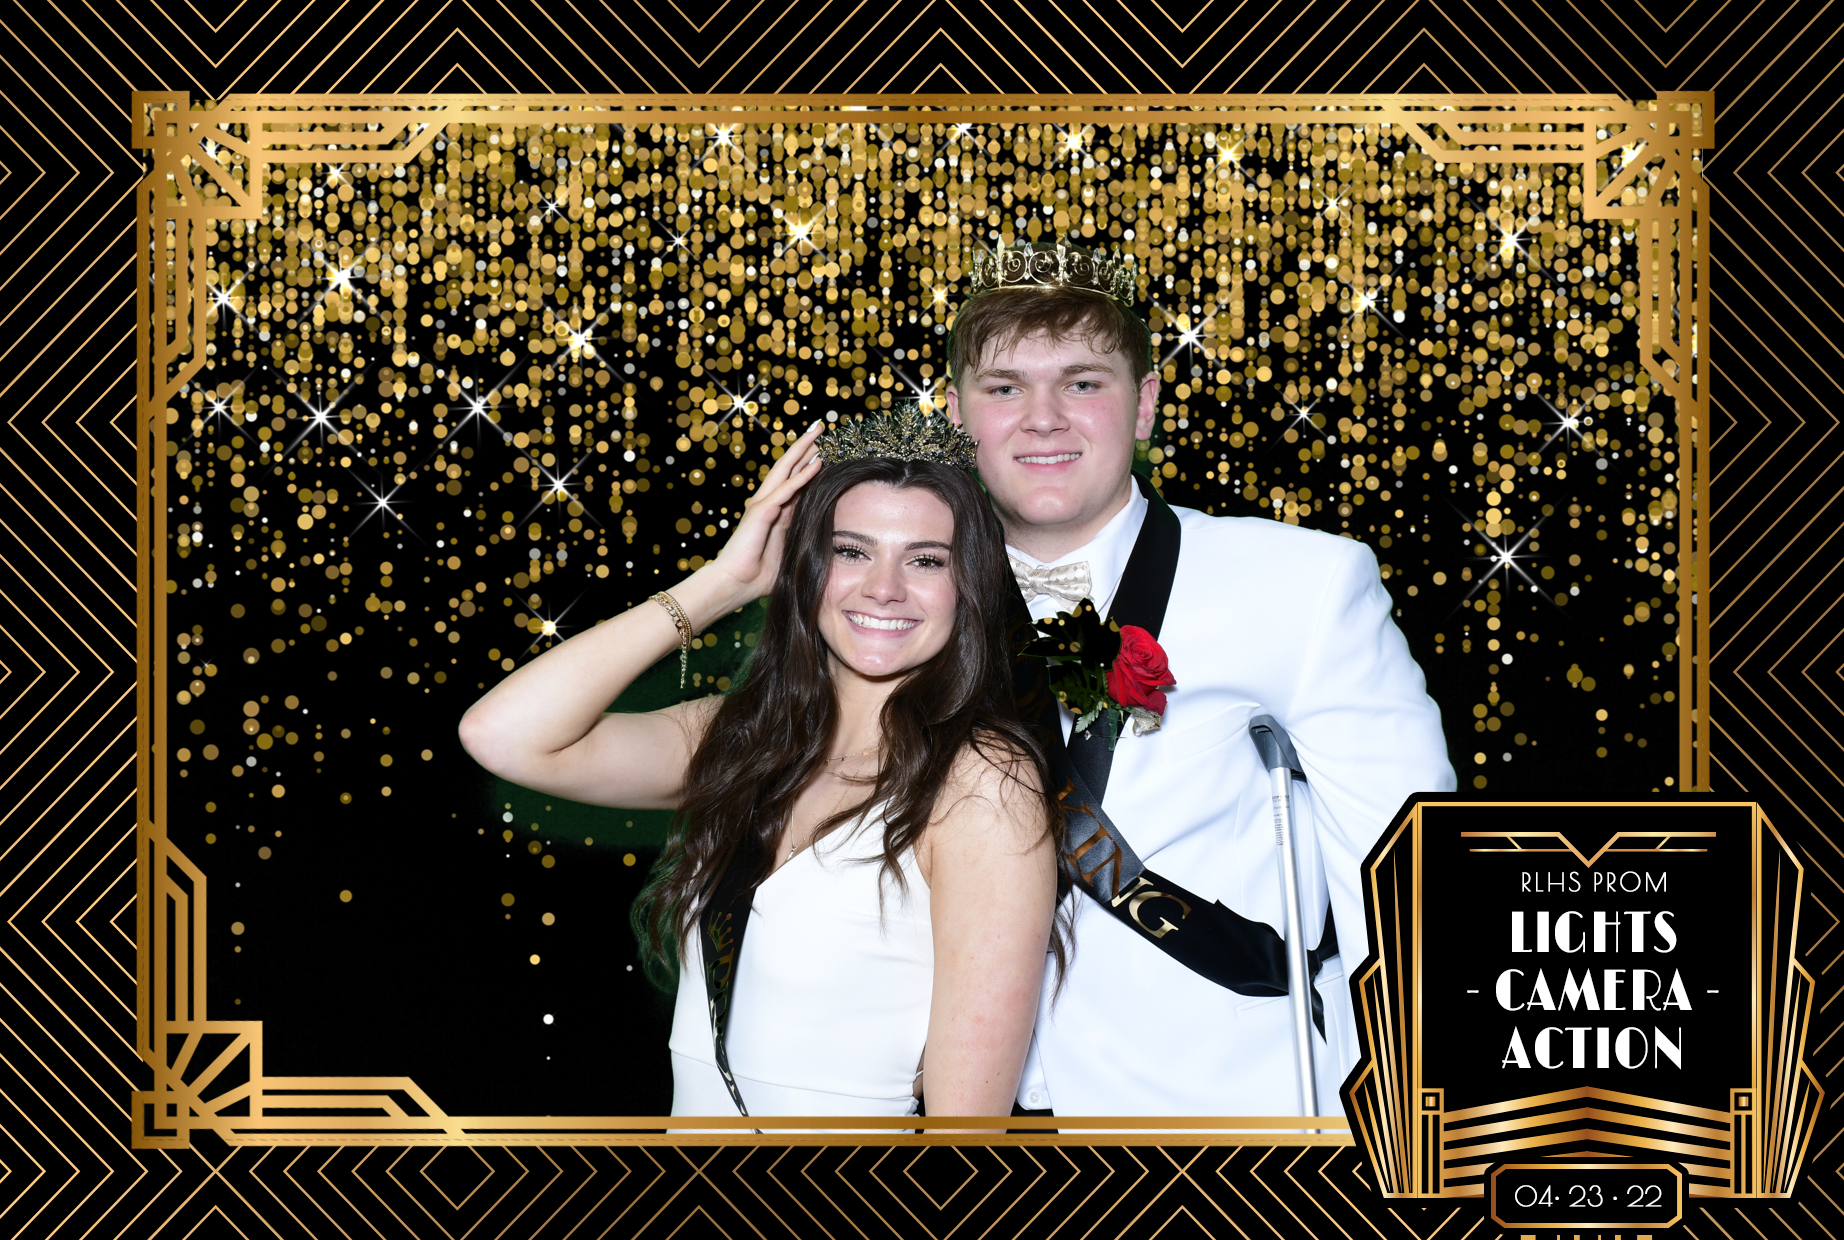 Sample photo from a prom event